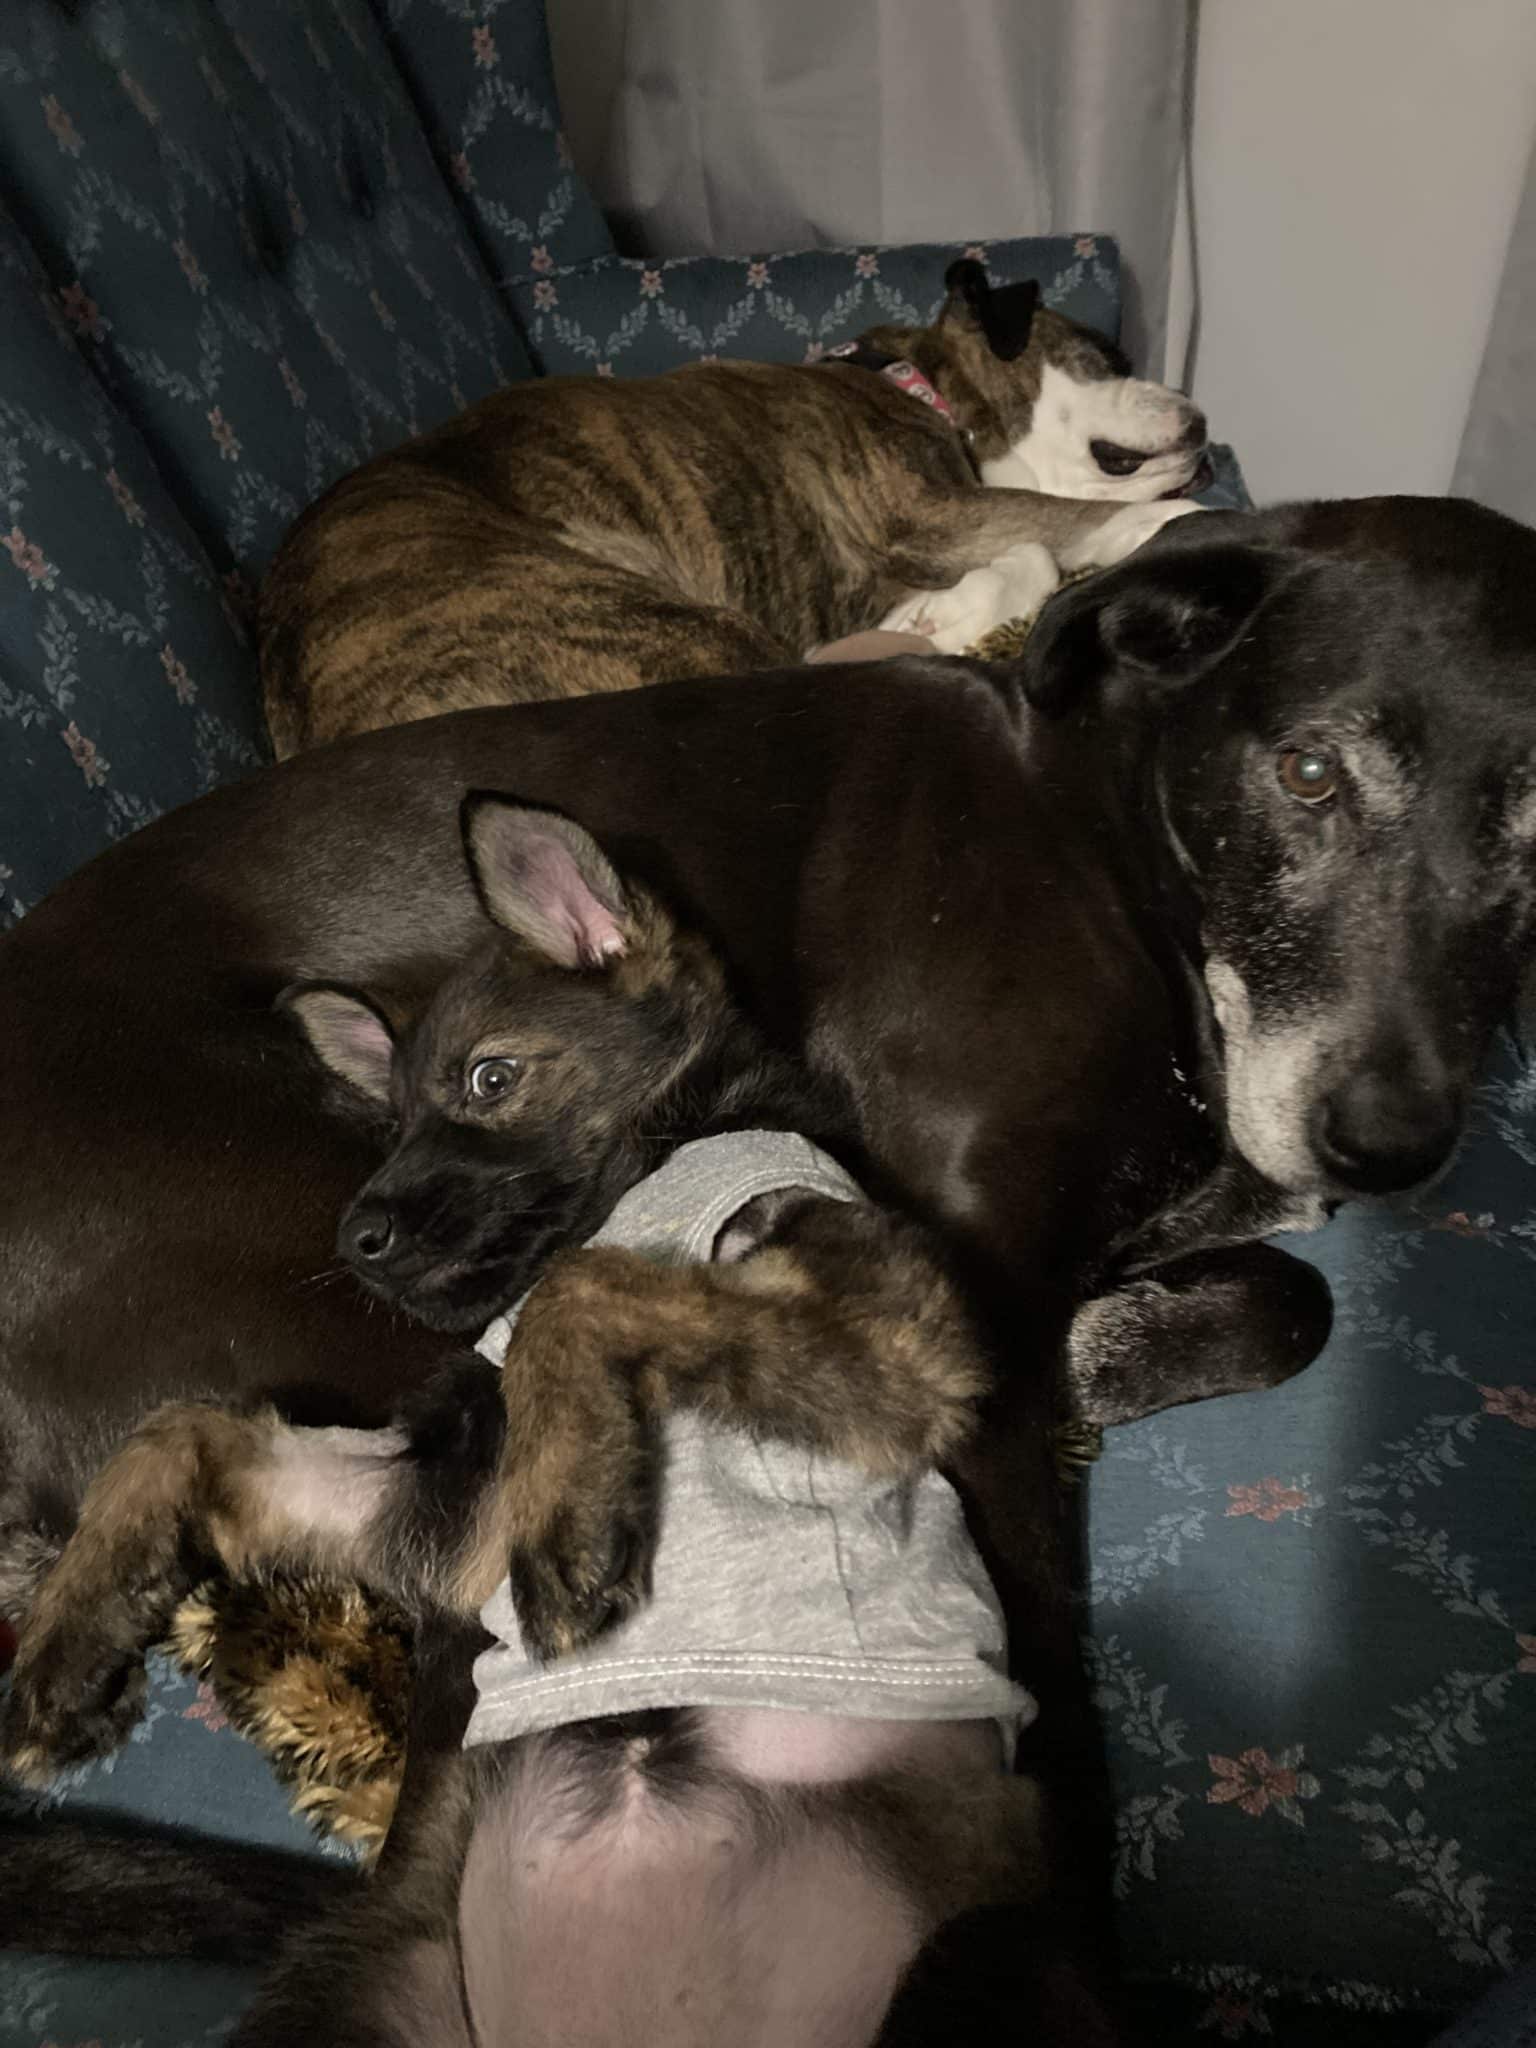 Alice in a t-shirt relaxing with her other dog friends while she recovers